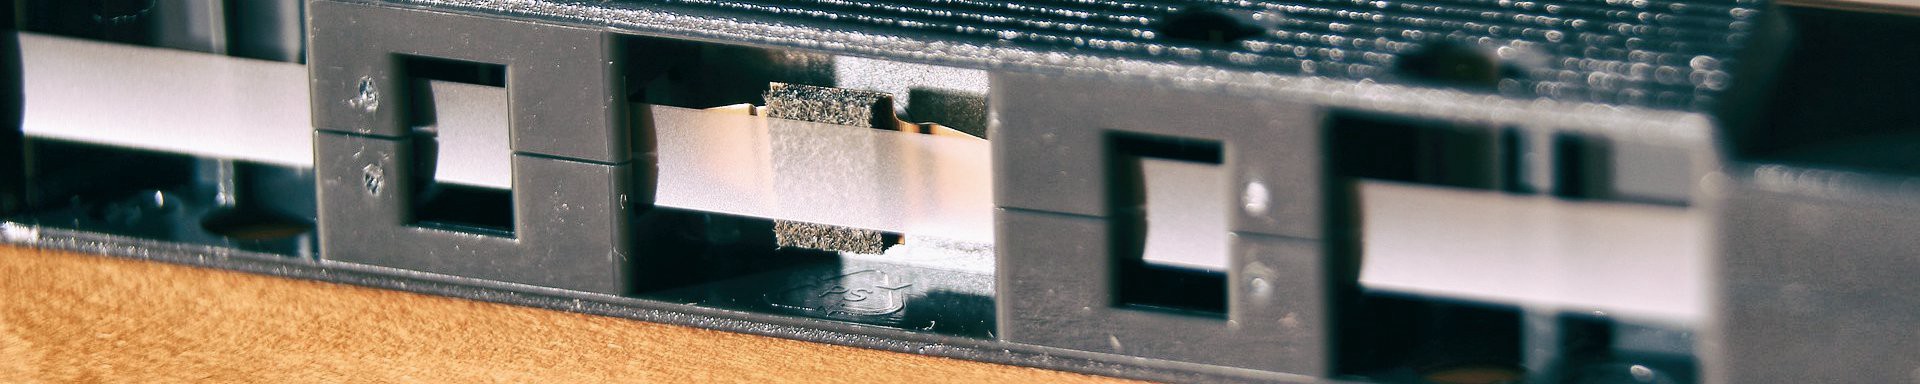 A close-up of the read/write head on a cassette tape.